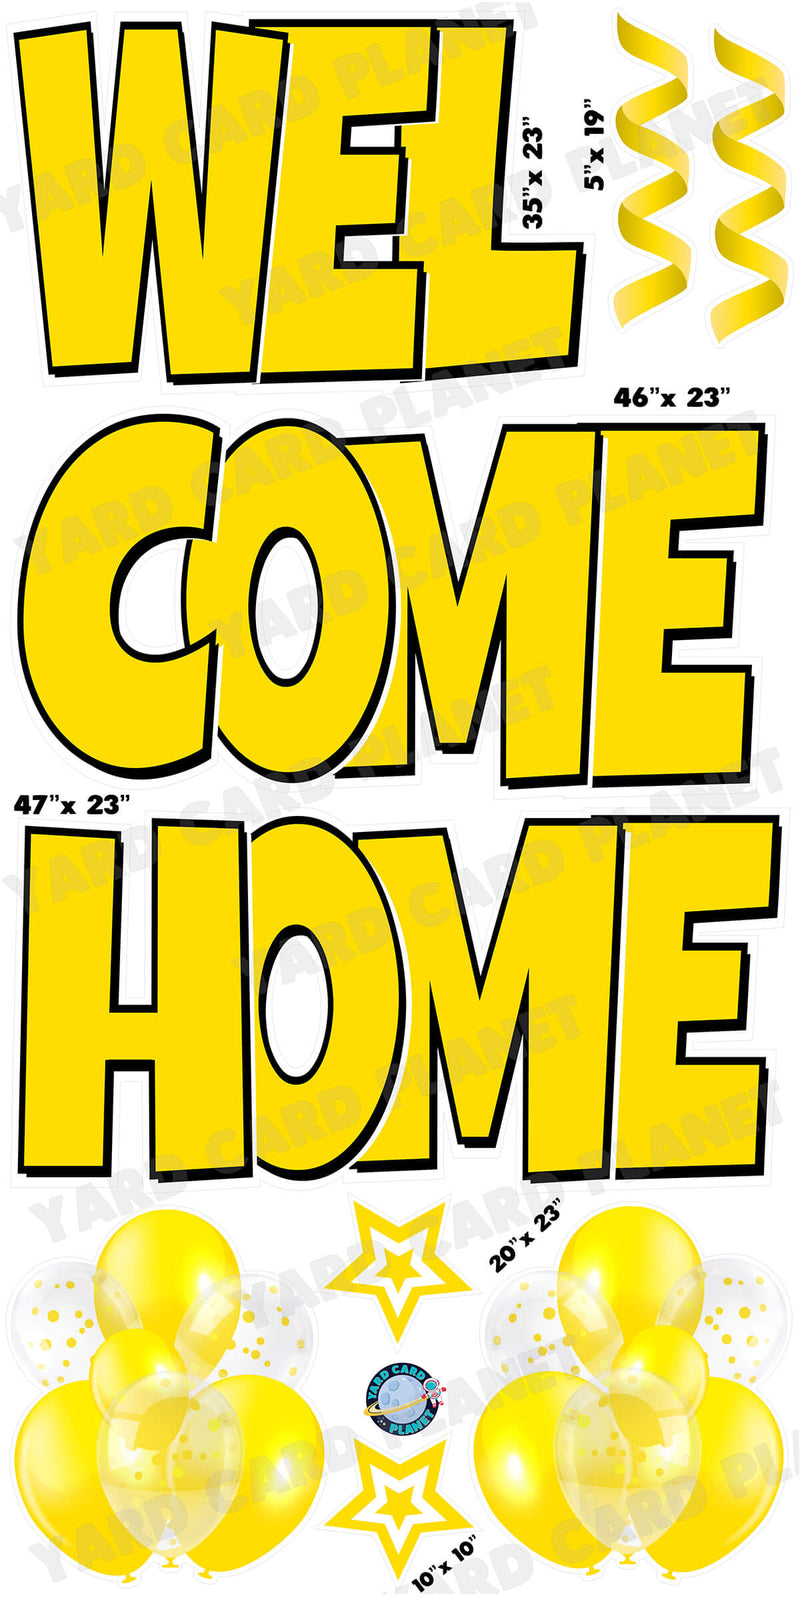 Large 23" Welcome Home Yard Card EZ Quick Sets in Luckiest Guy Font and Flair in Yellow Solid Color